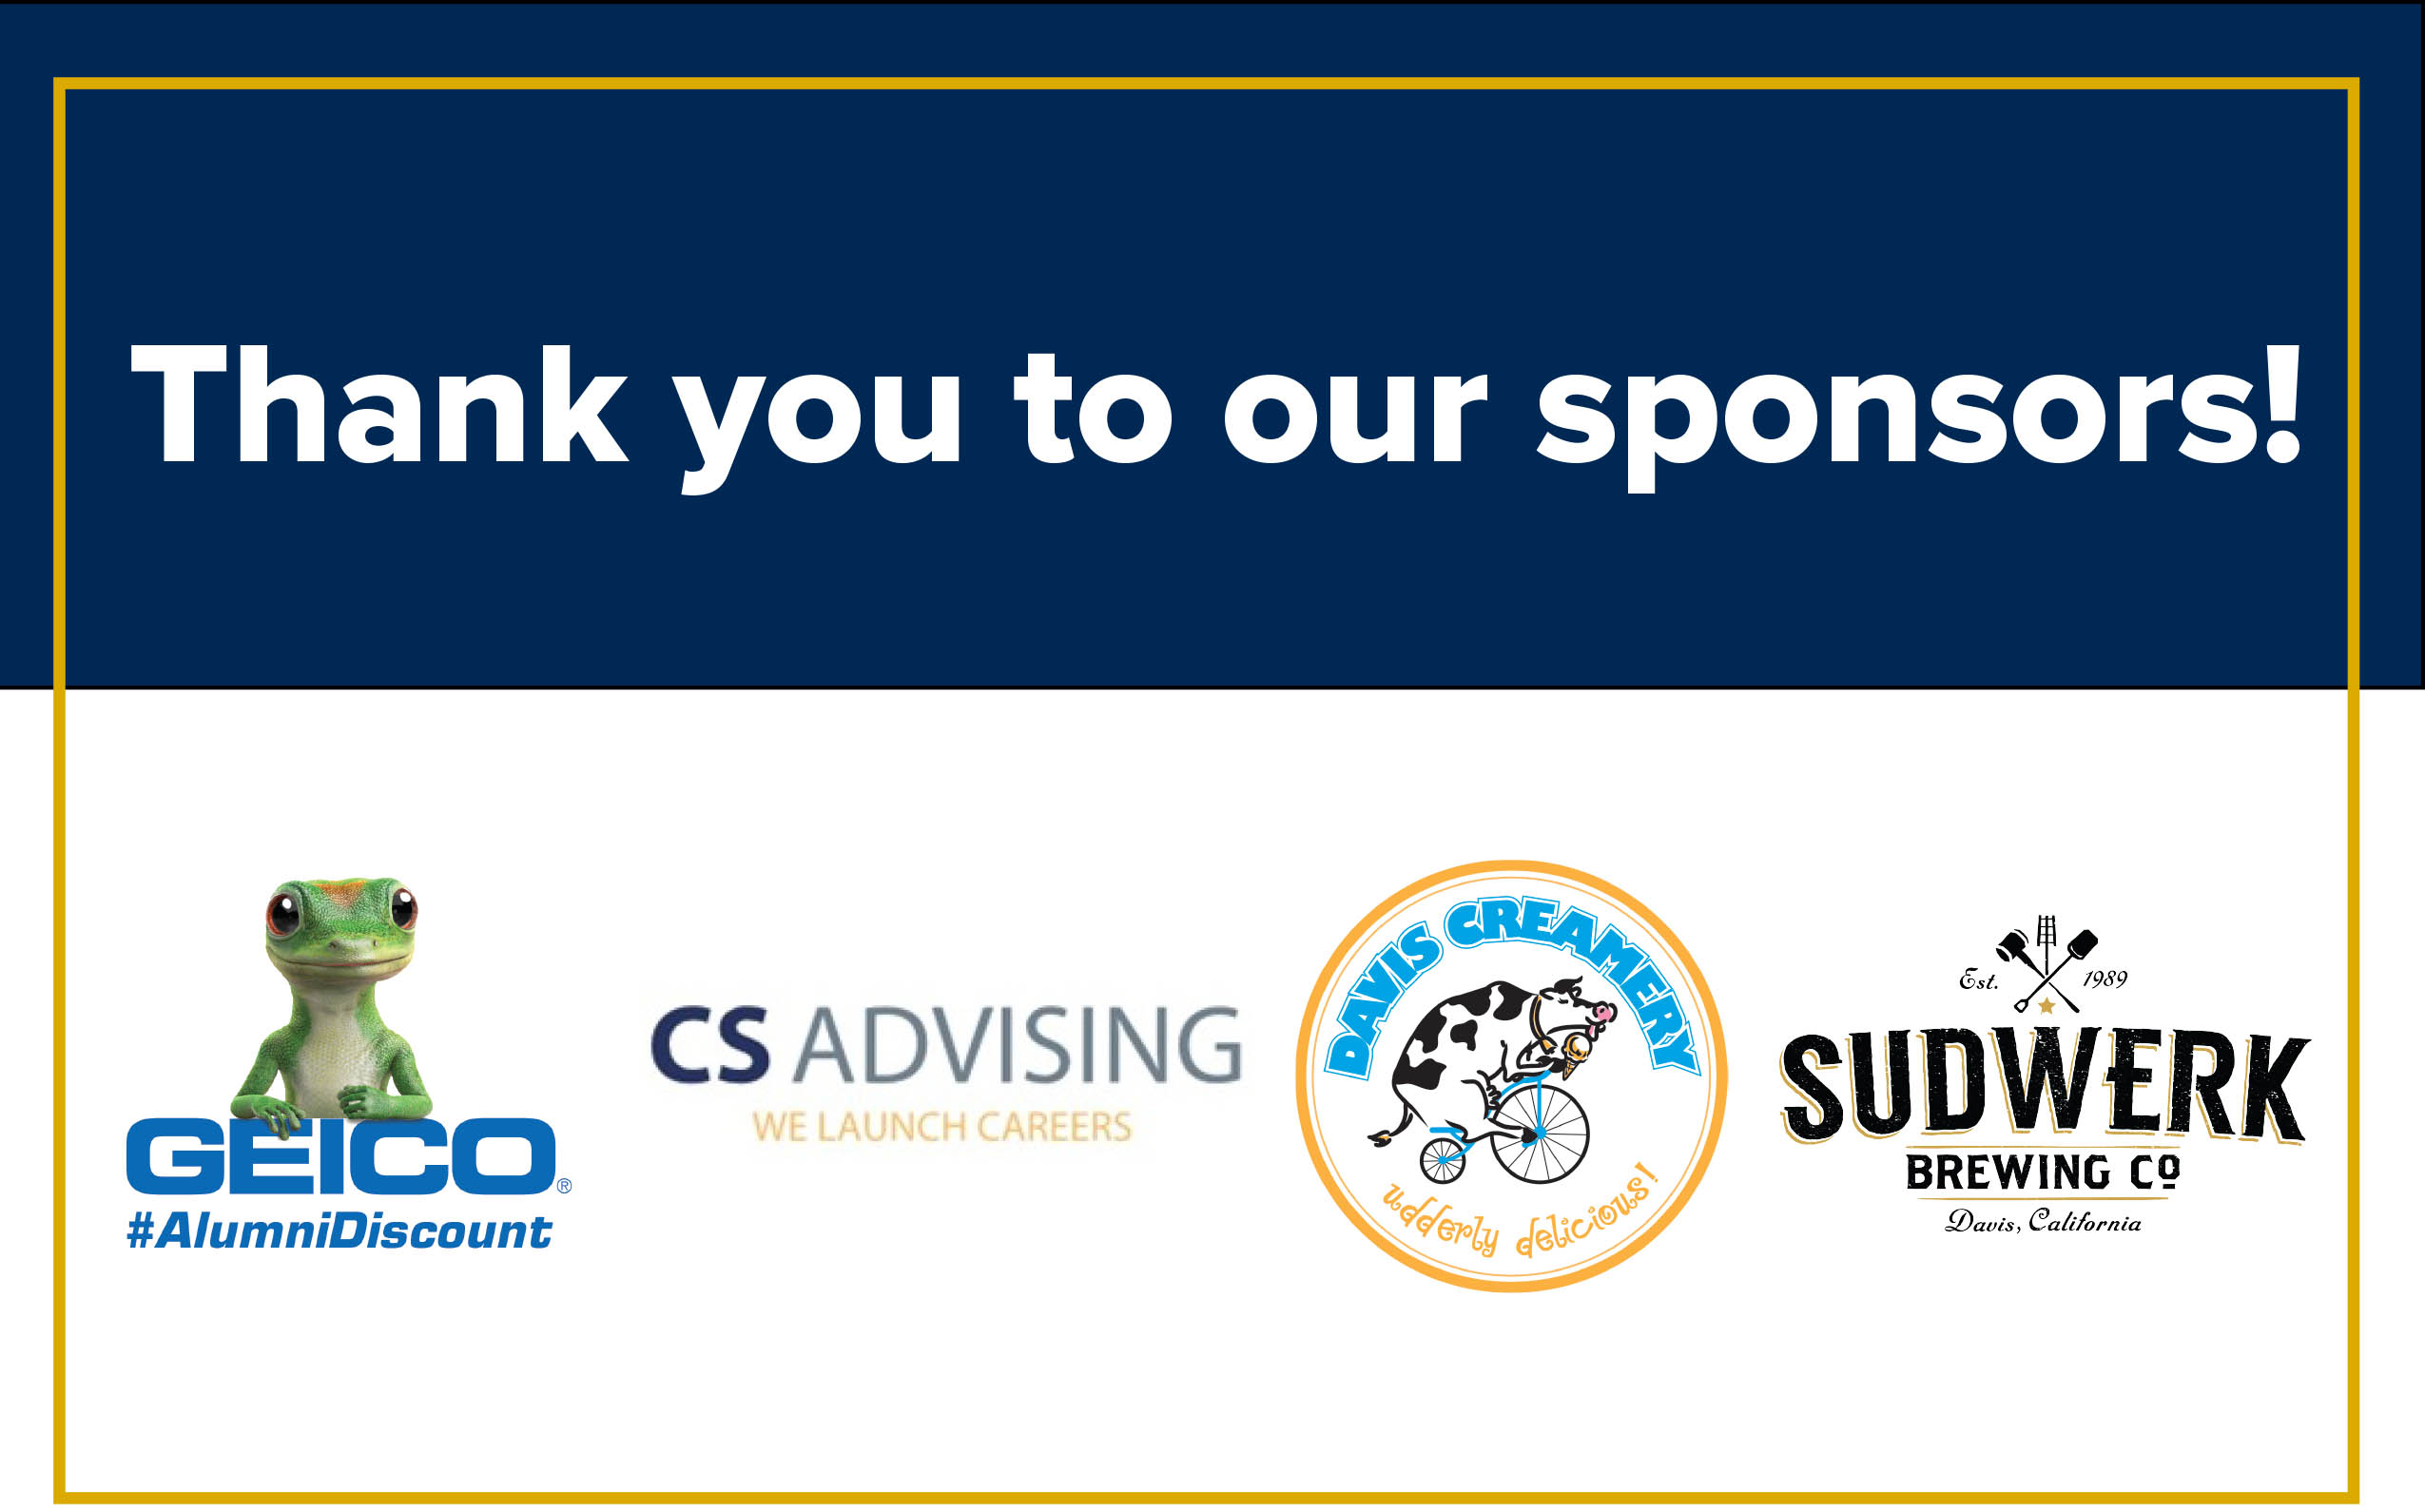 Thank you to our sponsors! GEICO #AlumniDiscount; CS Advising: We Launch Careers; Davis Creamery and Sudwerk Brewing Co.